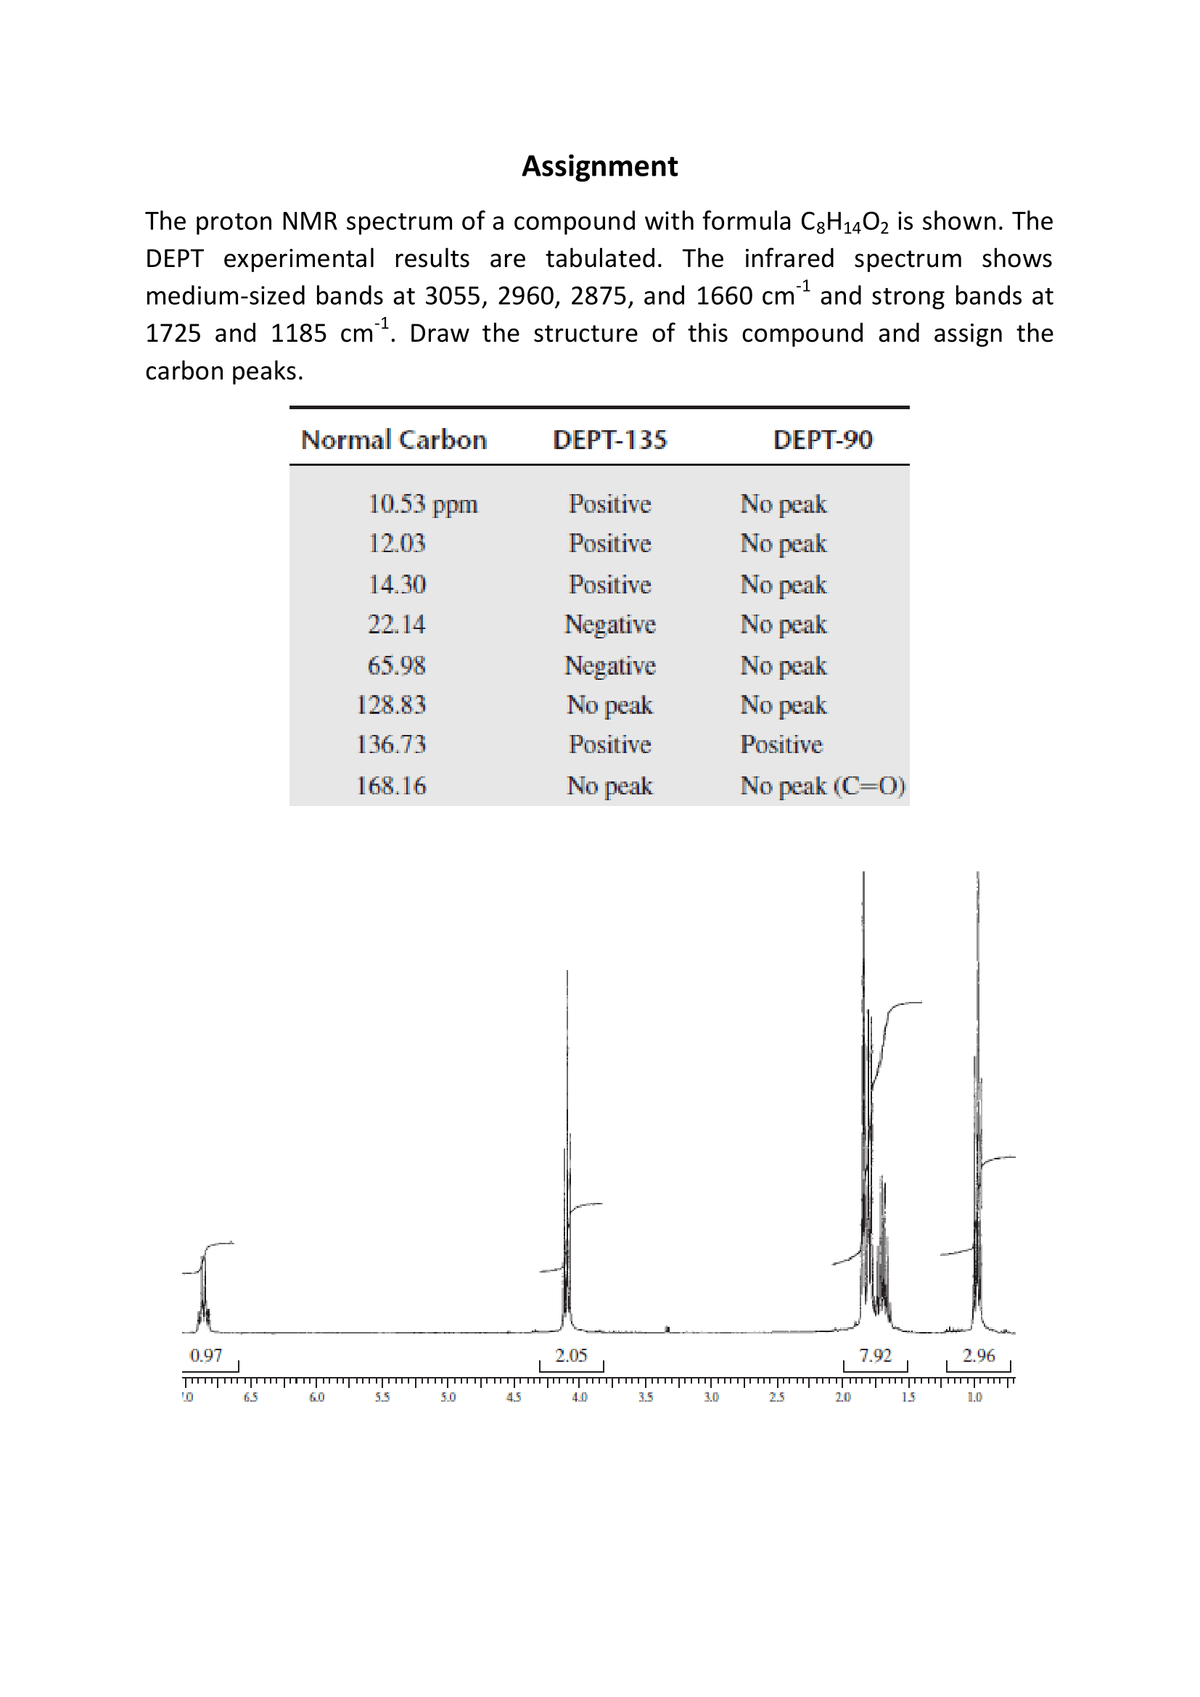 Assignment
The proton NMR spectrum of a compound with formula C3H14O2 is shown. The
DEPT experimental results are tabulated. The infrared spectrum shows
-1
medium-sized bands at 3055, 2960, 2875, and 1660 cm and strong bands at
1725 and 1185 cm. Draw the structure of this compound and assign the
carbon peaks.
Normal Carbon
DEPT-135
DEPT-90
10.53 ppm
Positive
No peak
No peak
No peak
No peak
12.03
Positive
14.30
Positive
22.14
Negative
No peak
No peak
65.98
Negative
No peak
128.83
136.73
Positive
Positive
168.16
No peak
No peak (C=0)
0.97
2.05
7.92
2.96
65
60
5.5
5.0
4.5
4.0
3.5
3.0
25
20
15
1.0
